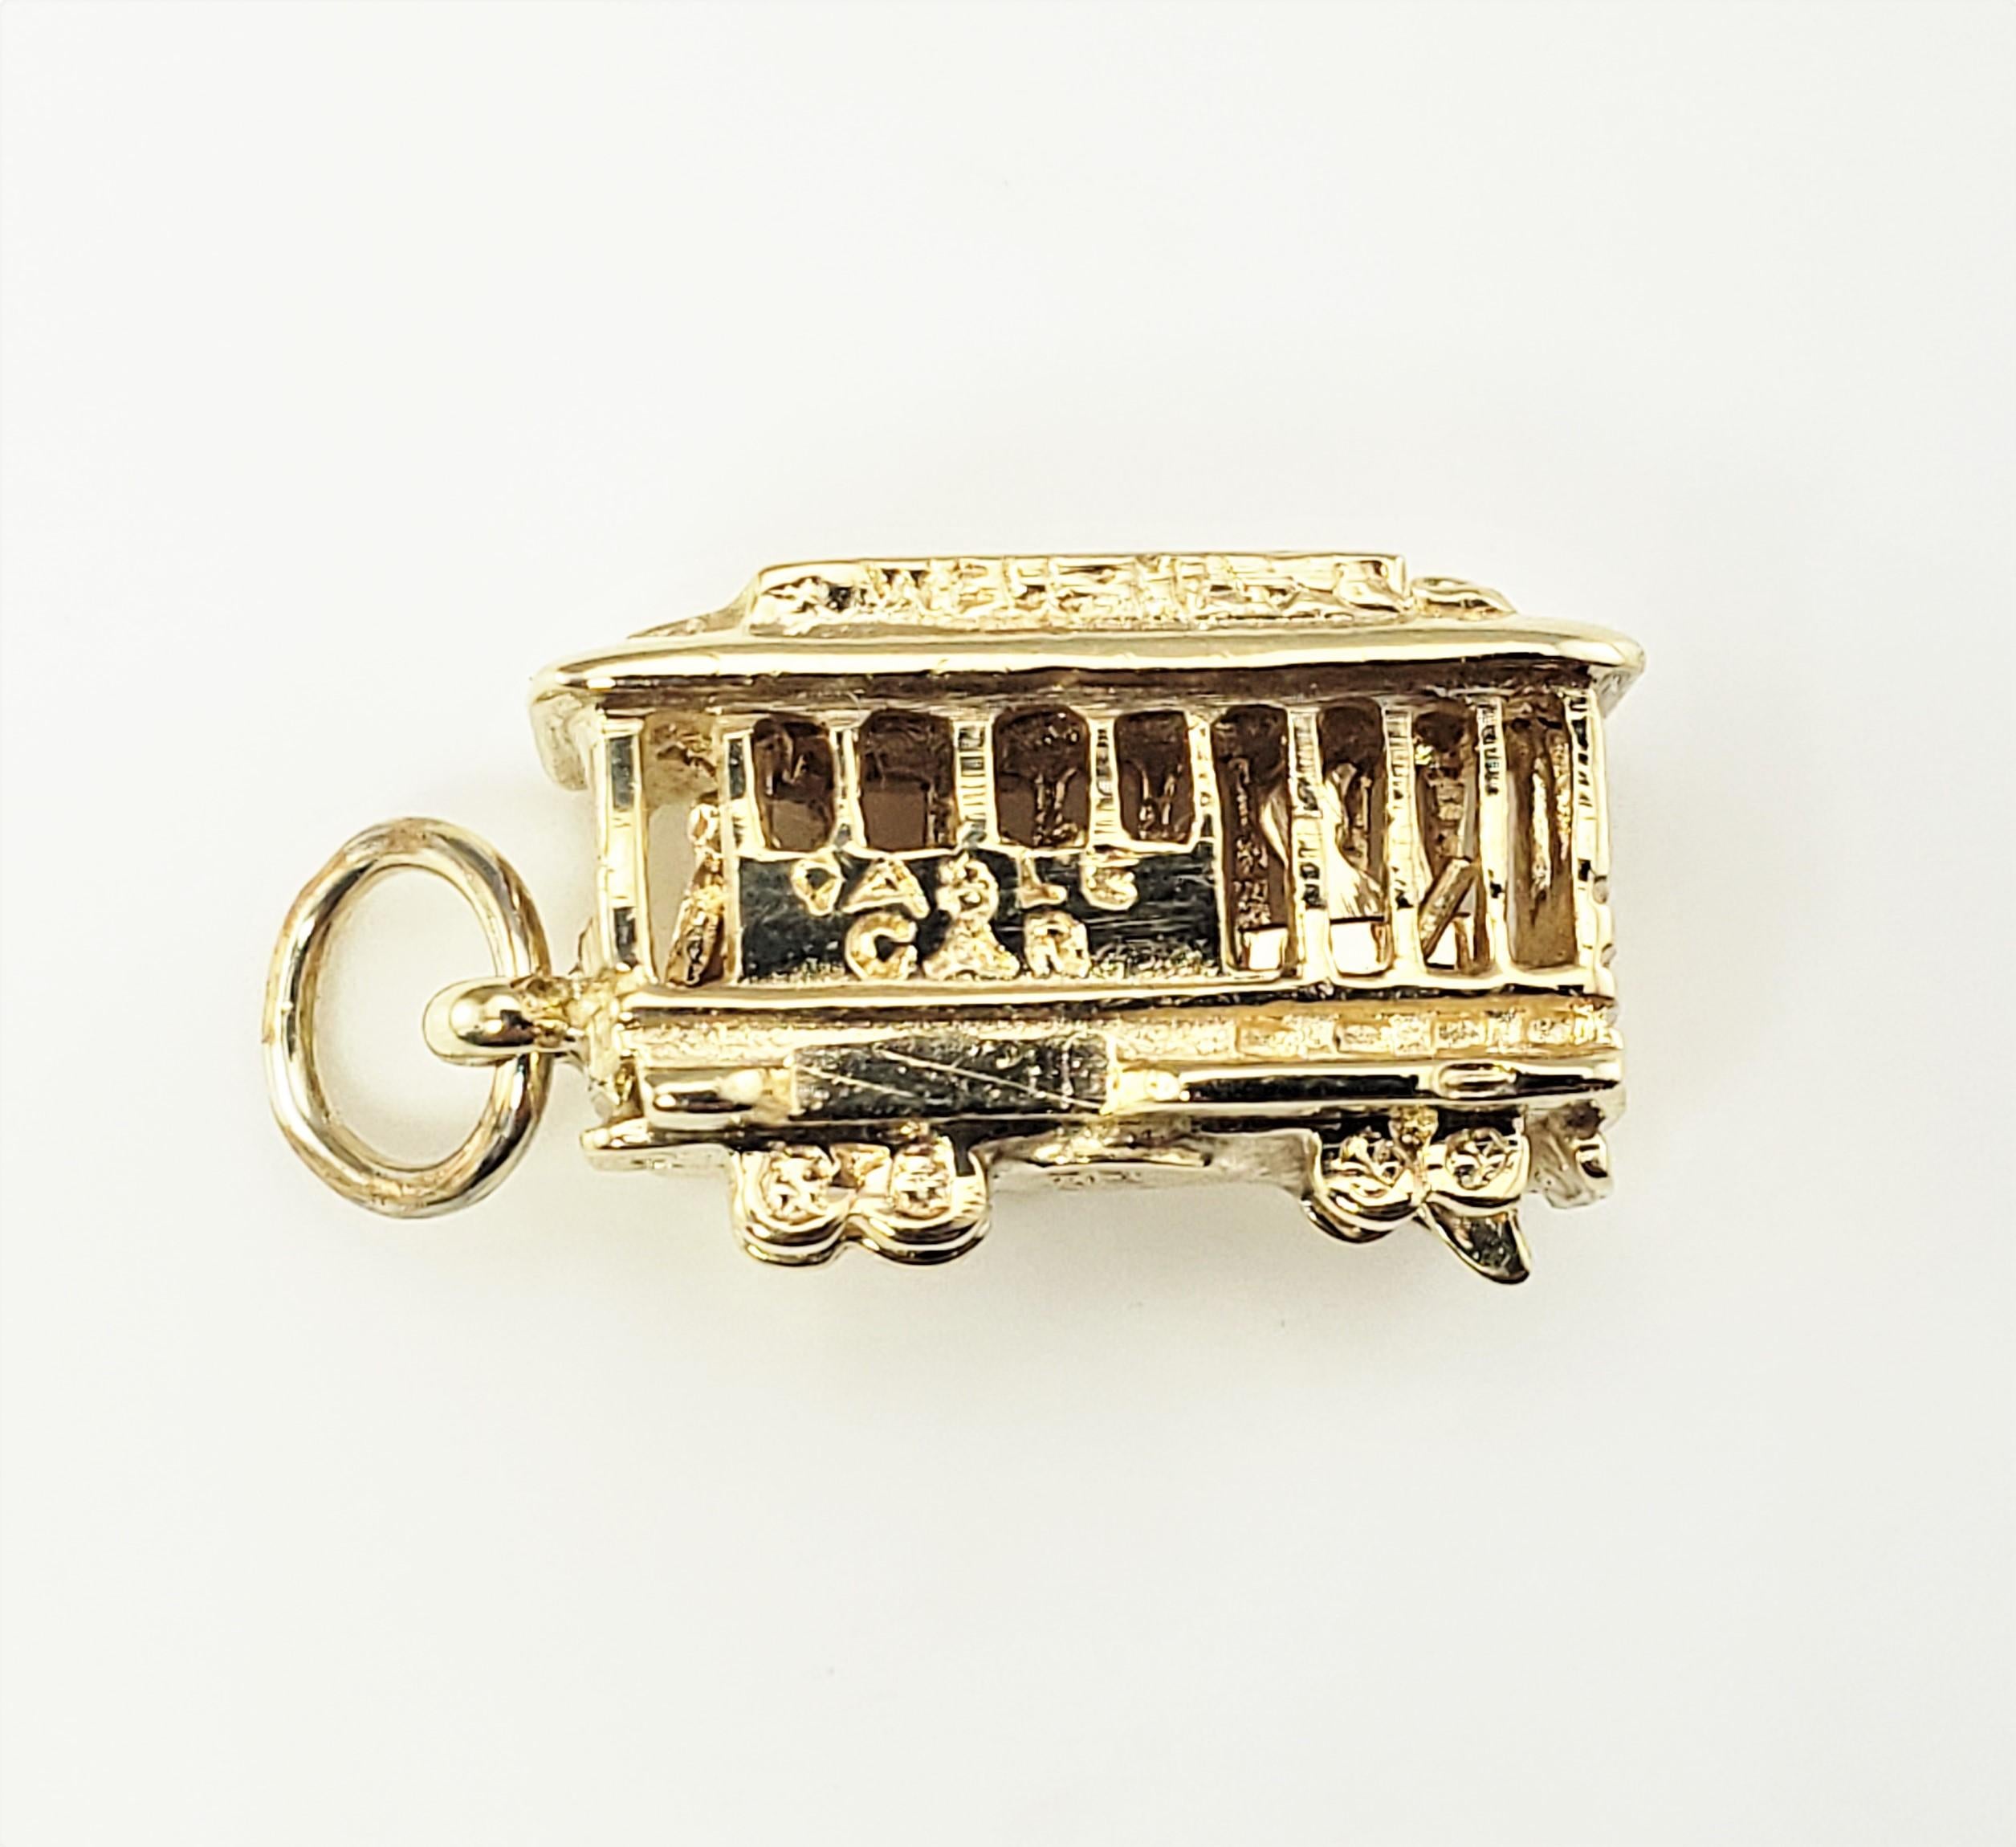 14 Karat Yellow Gold Powell Mason San Francisco Cable Car Charm-

Perfect addition to your travel charm collection!

This lovely 3D charm features a miniature San Francisco cable car meticulously detailed in 14K yellow gold.

Size: 16 mm x 10